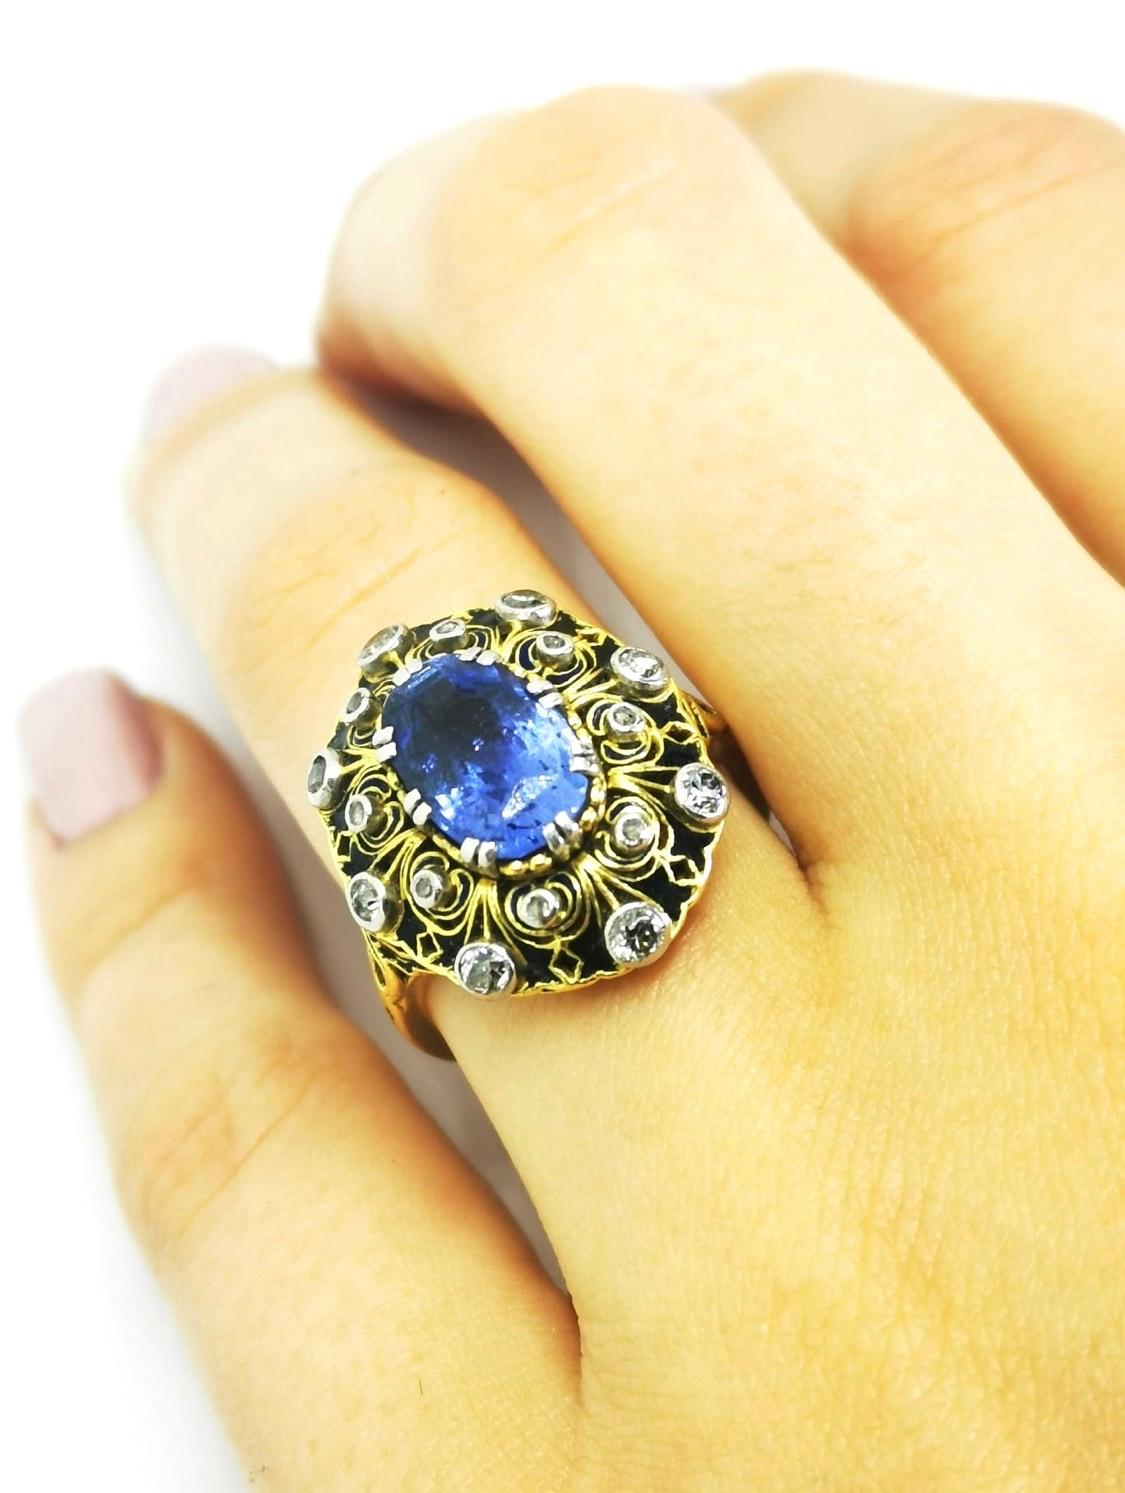 Vintage blue Sapphire and Diamonds ring

Vintage ring in 19.2K yellow gold and silver structure, mounted with natural blue Sapphire with 3.42ct in the center, surrounded by yellow gold and enemal decorations with 16 diamonds.
Top of ring measures